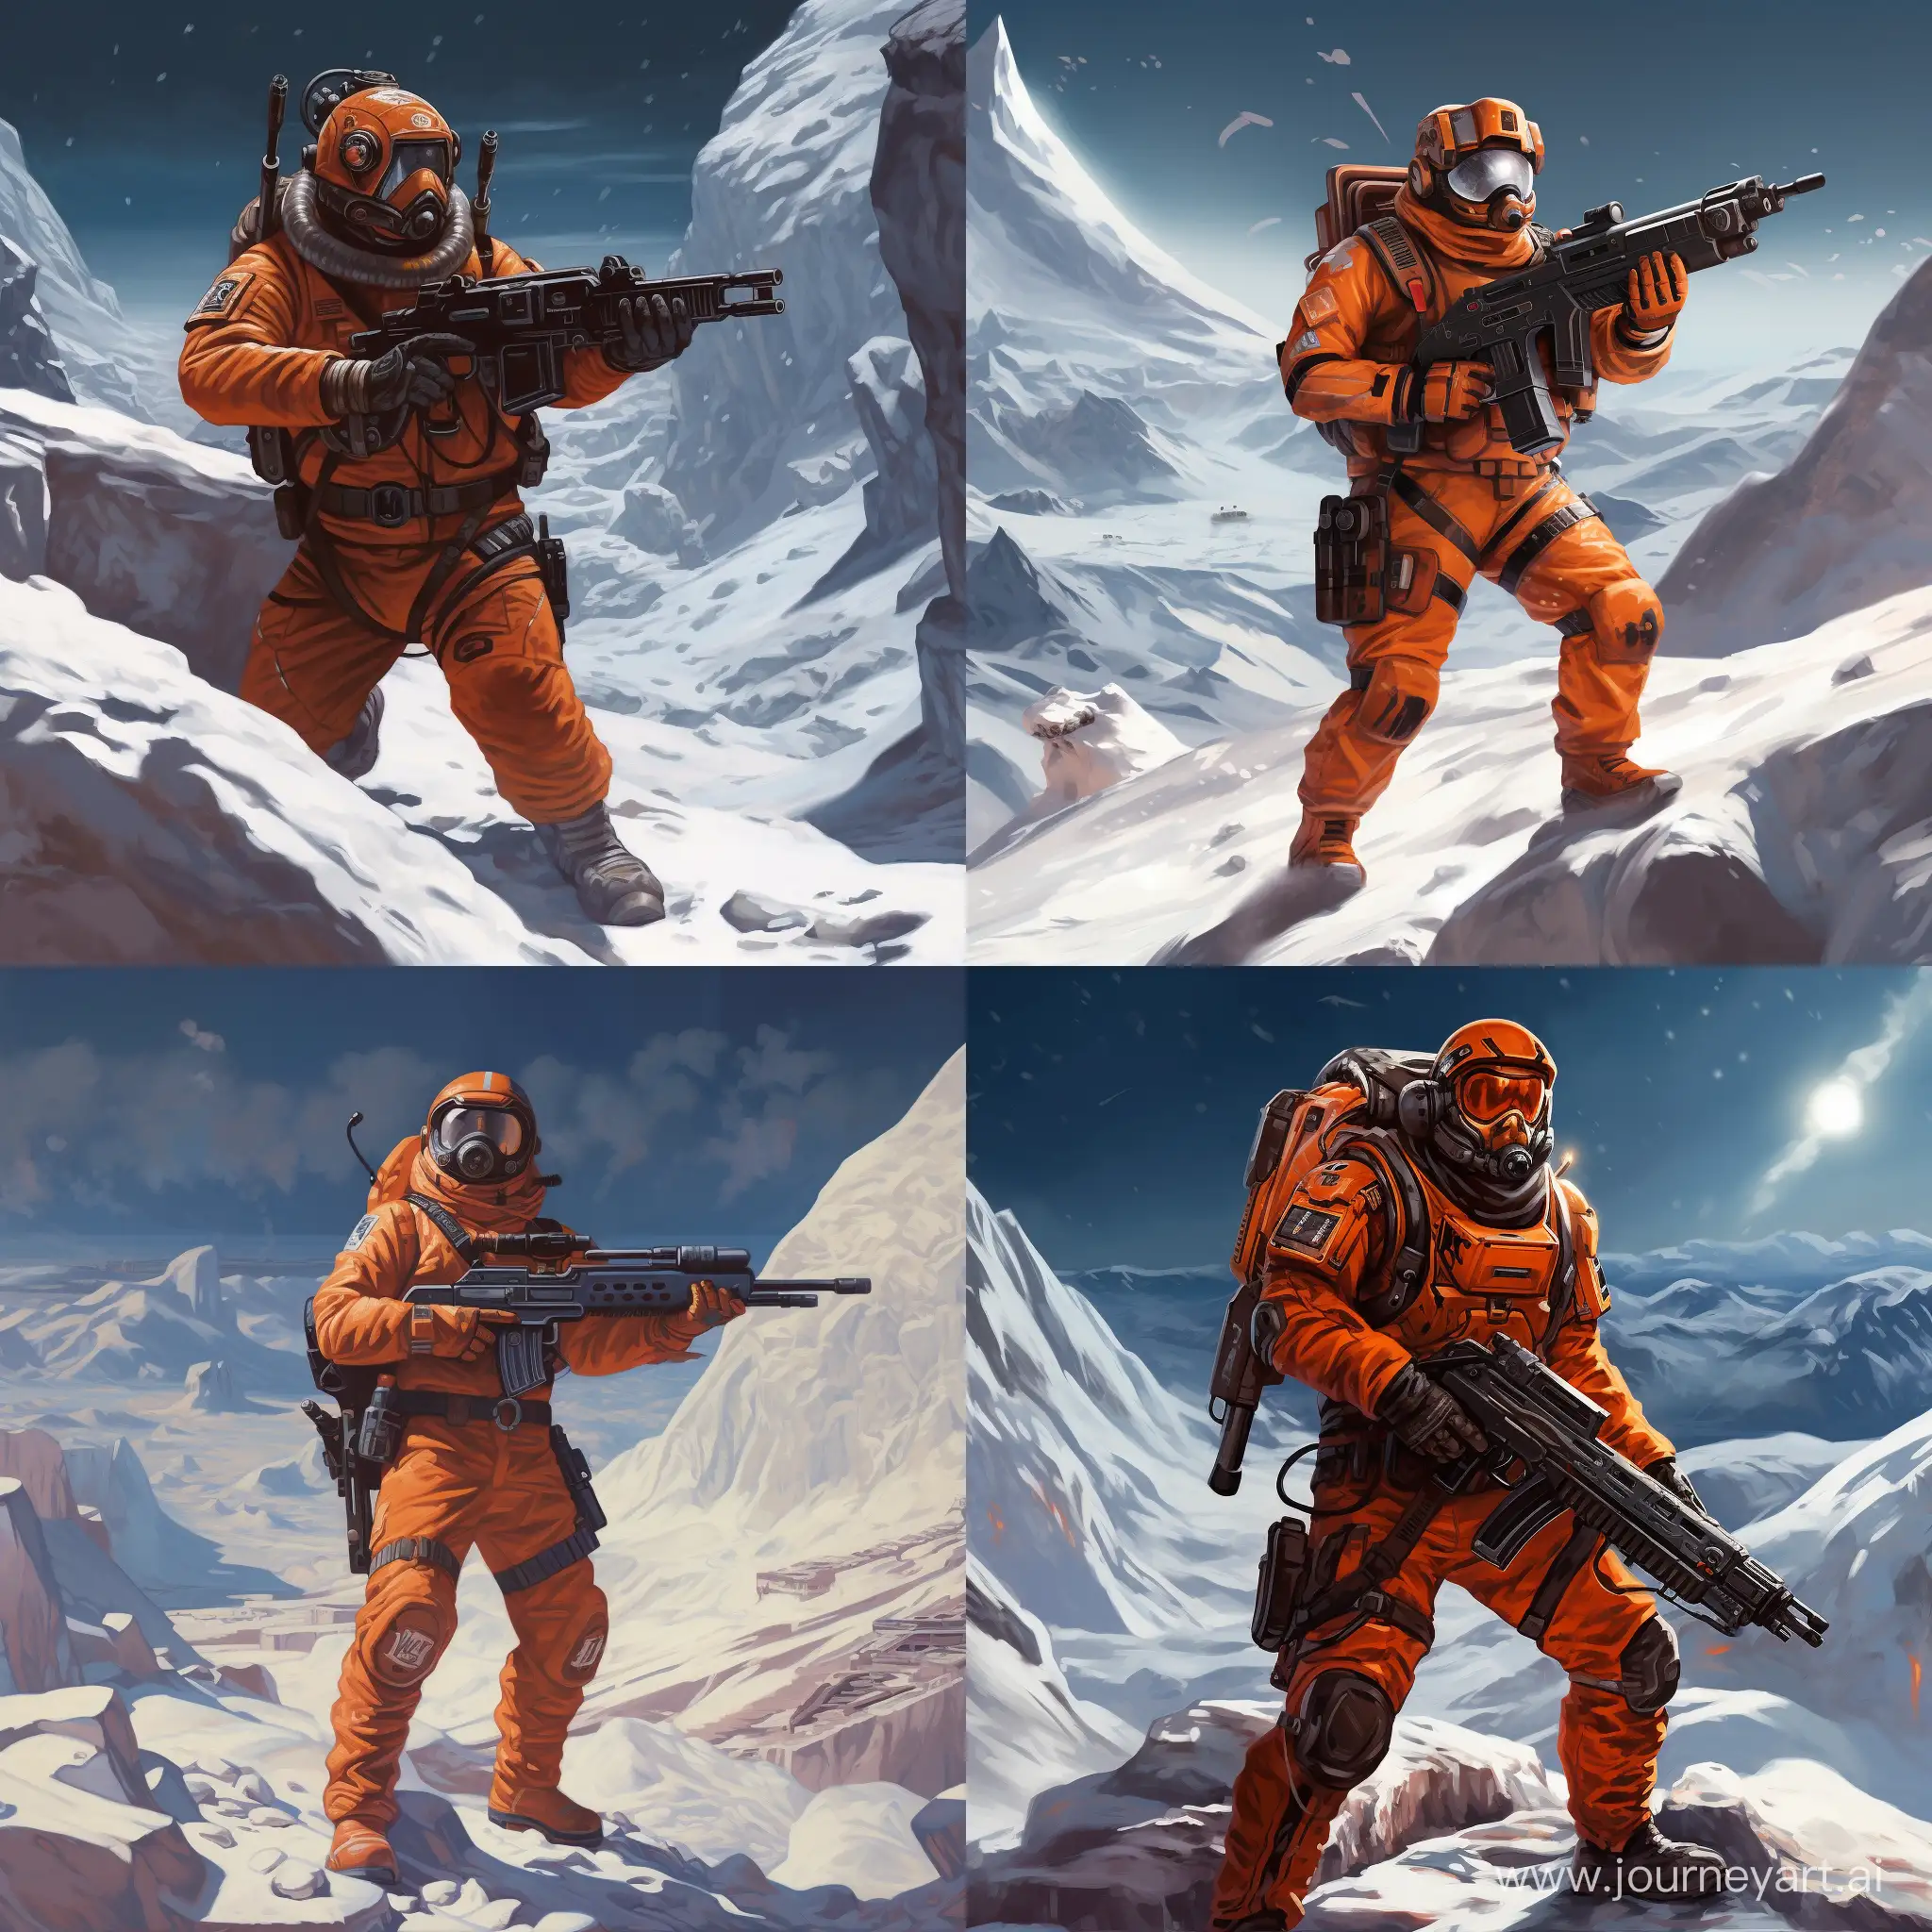 A sci fi astronaut in an orange dark fantasy spacesuit is barely standing on a snow-covered slope. He has a blaster in his right hand, which he points forward. He covers his stomach with his left hand.